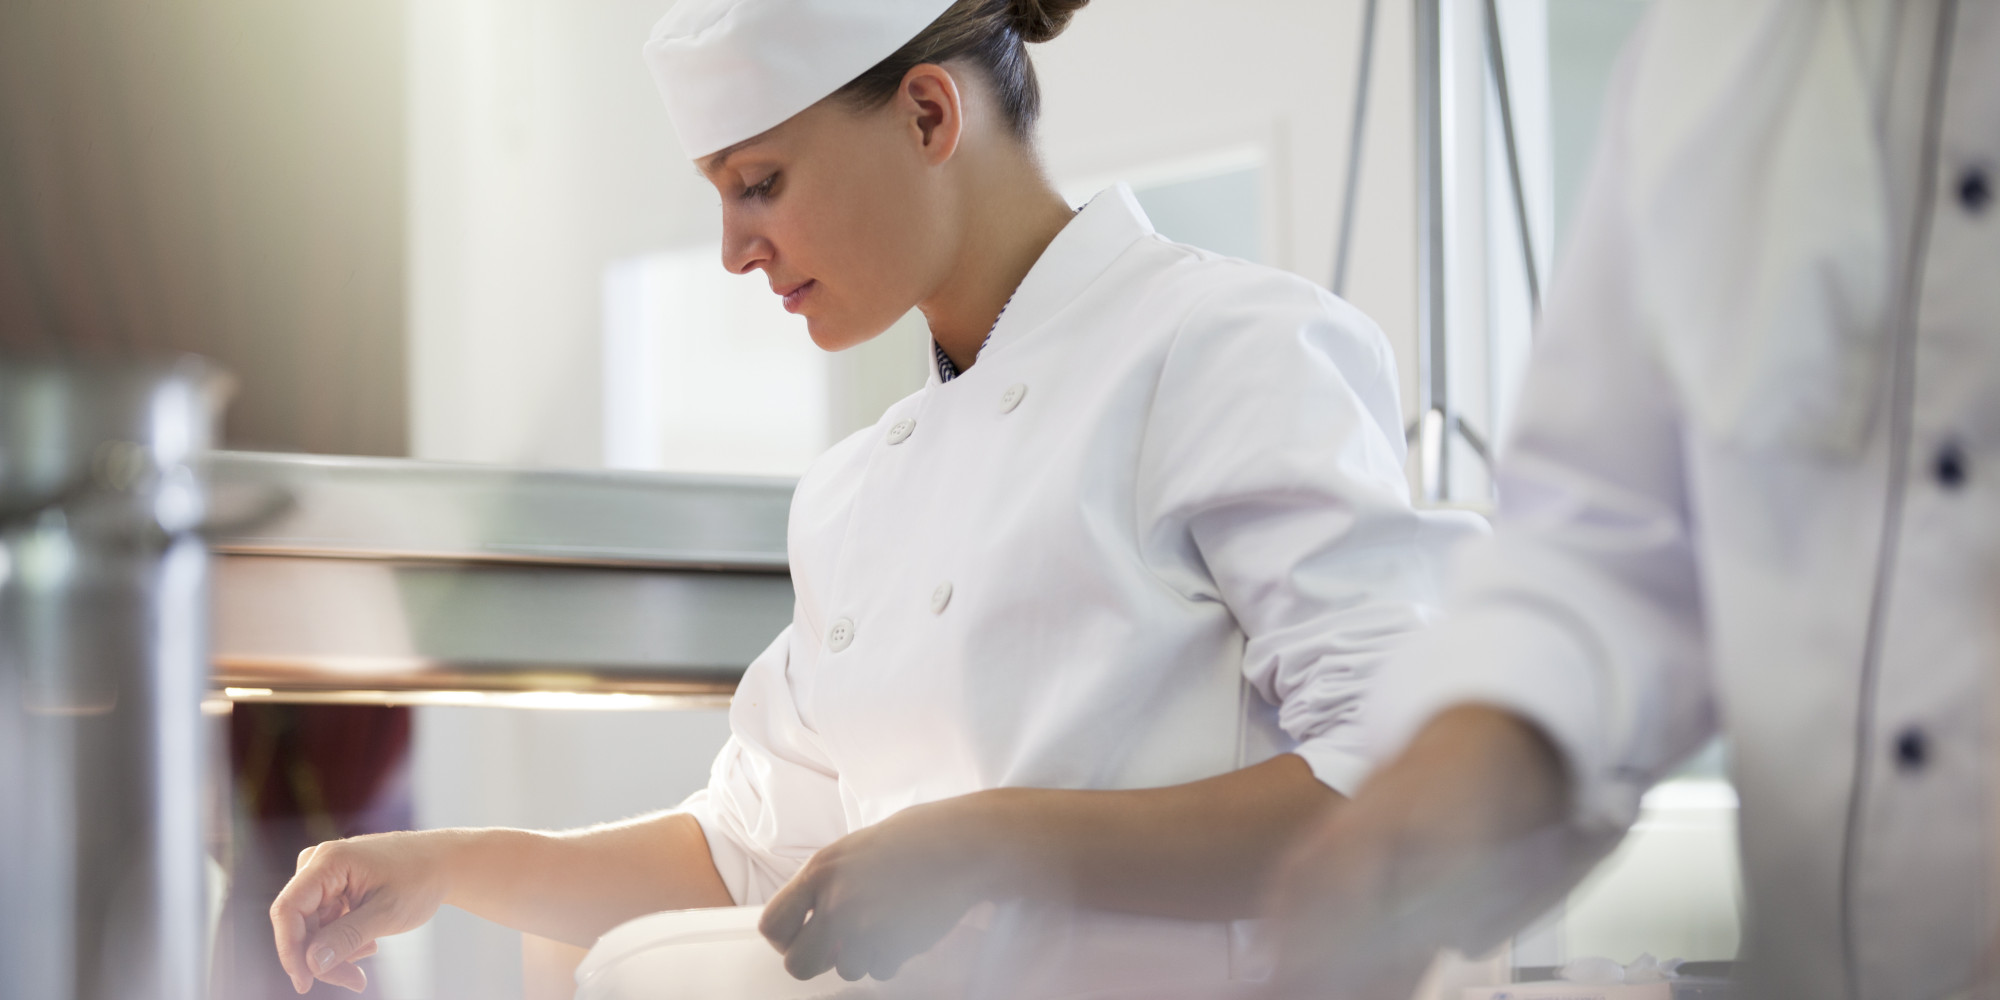 What are the qualities of a good chef? 